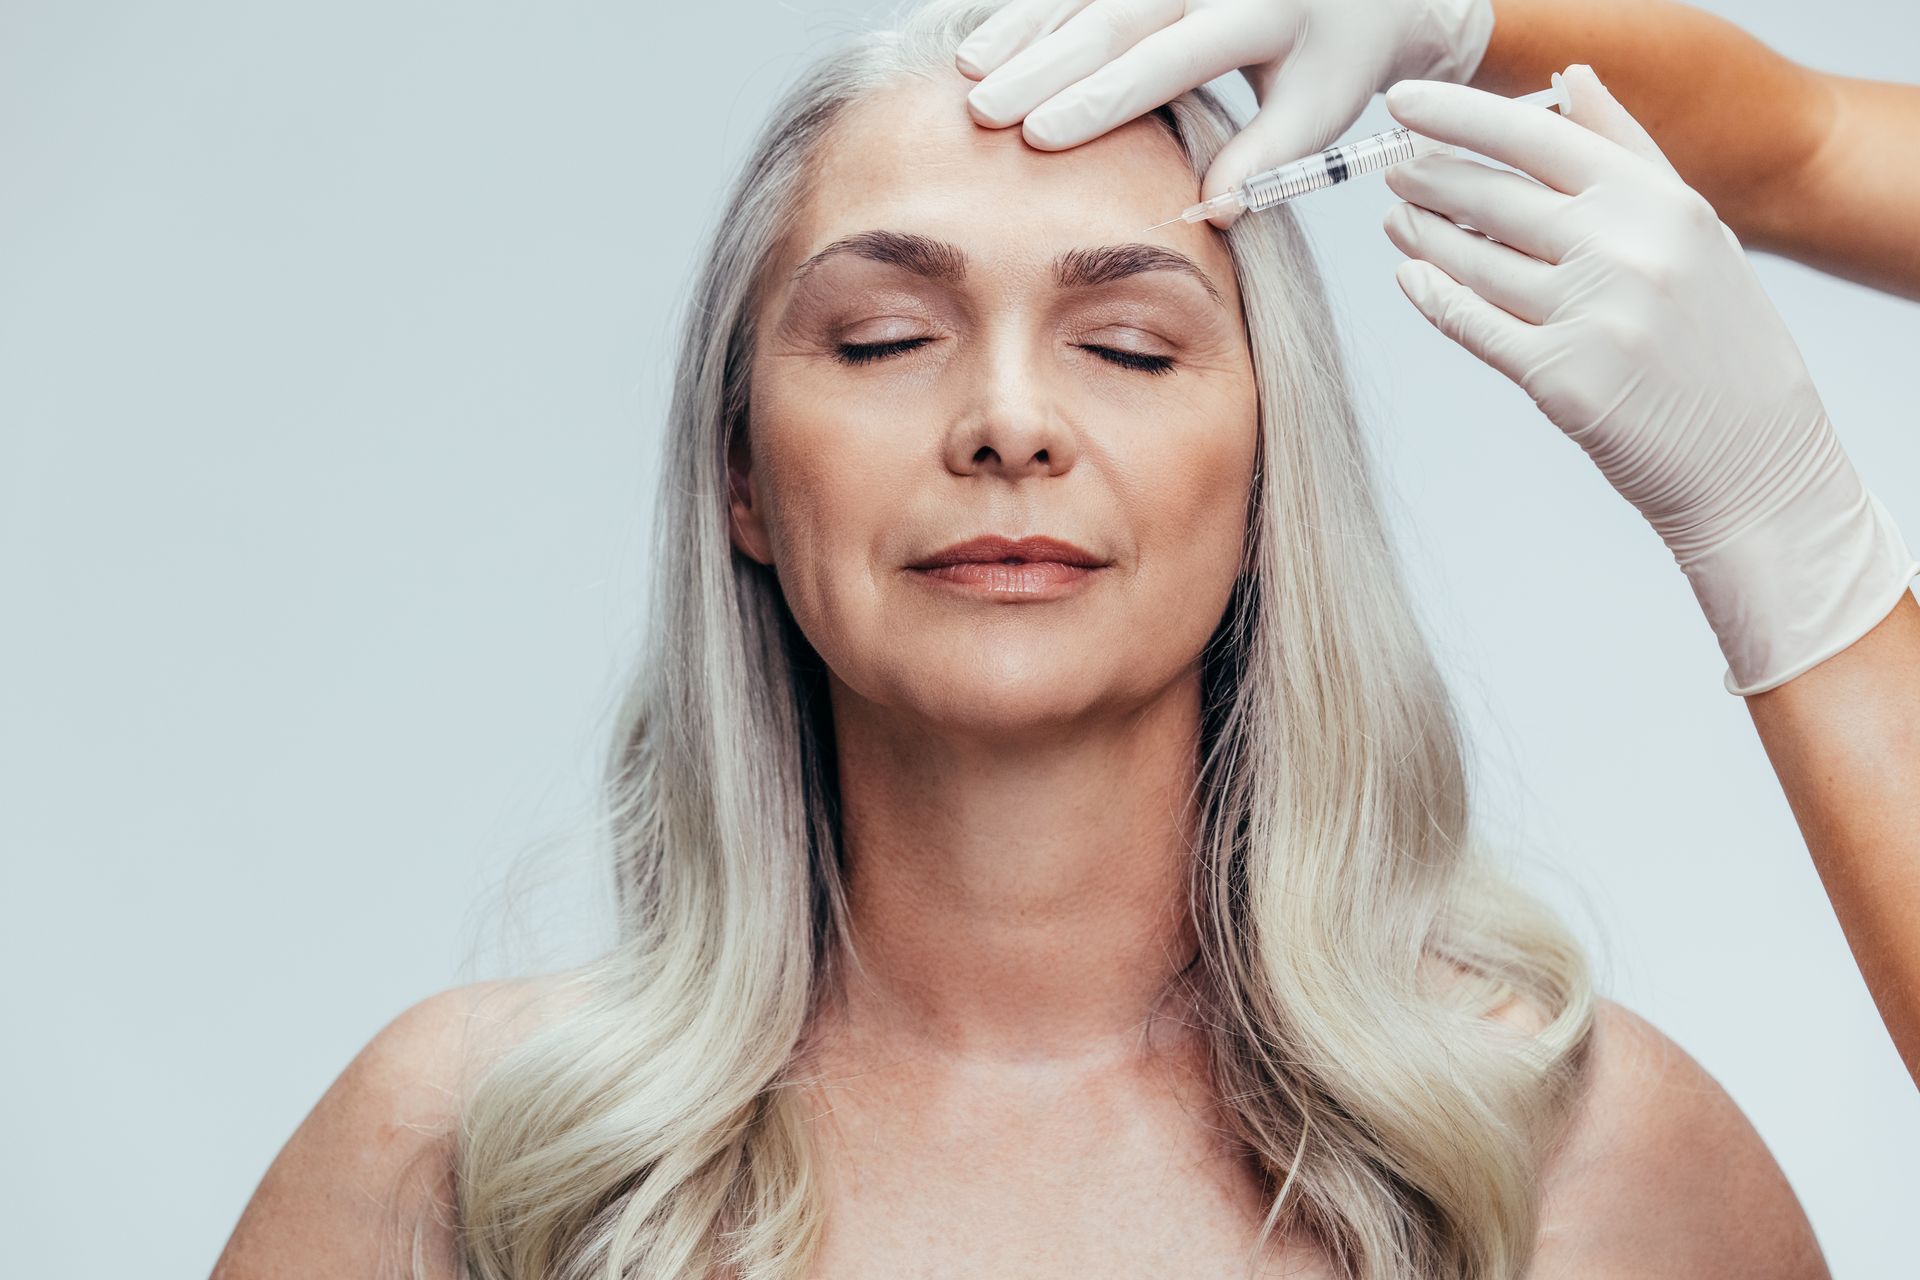 a woman is getting a botox injection on her forehead